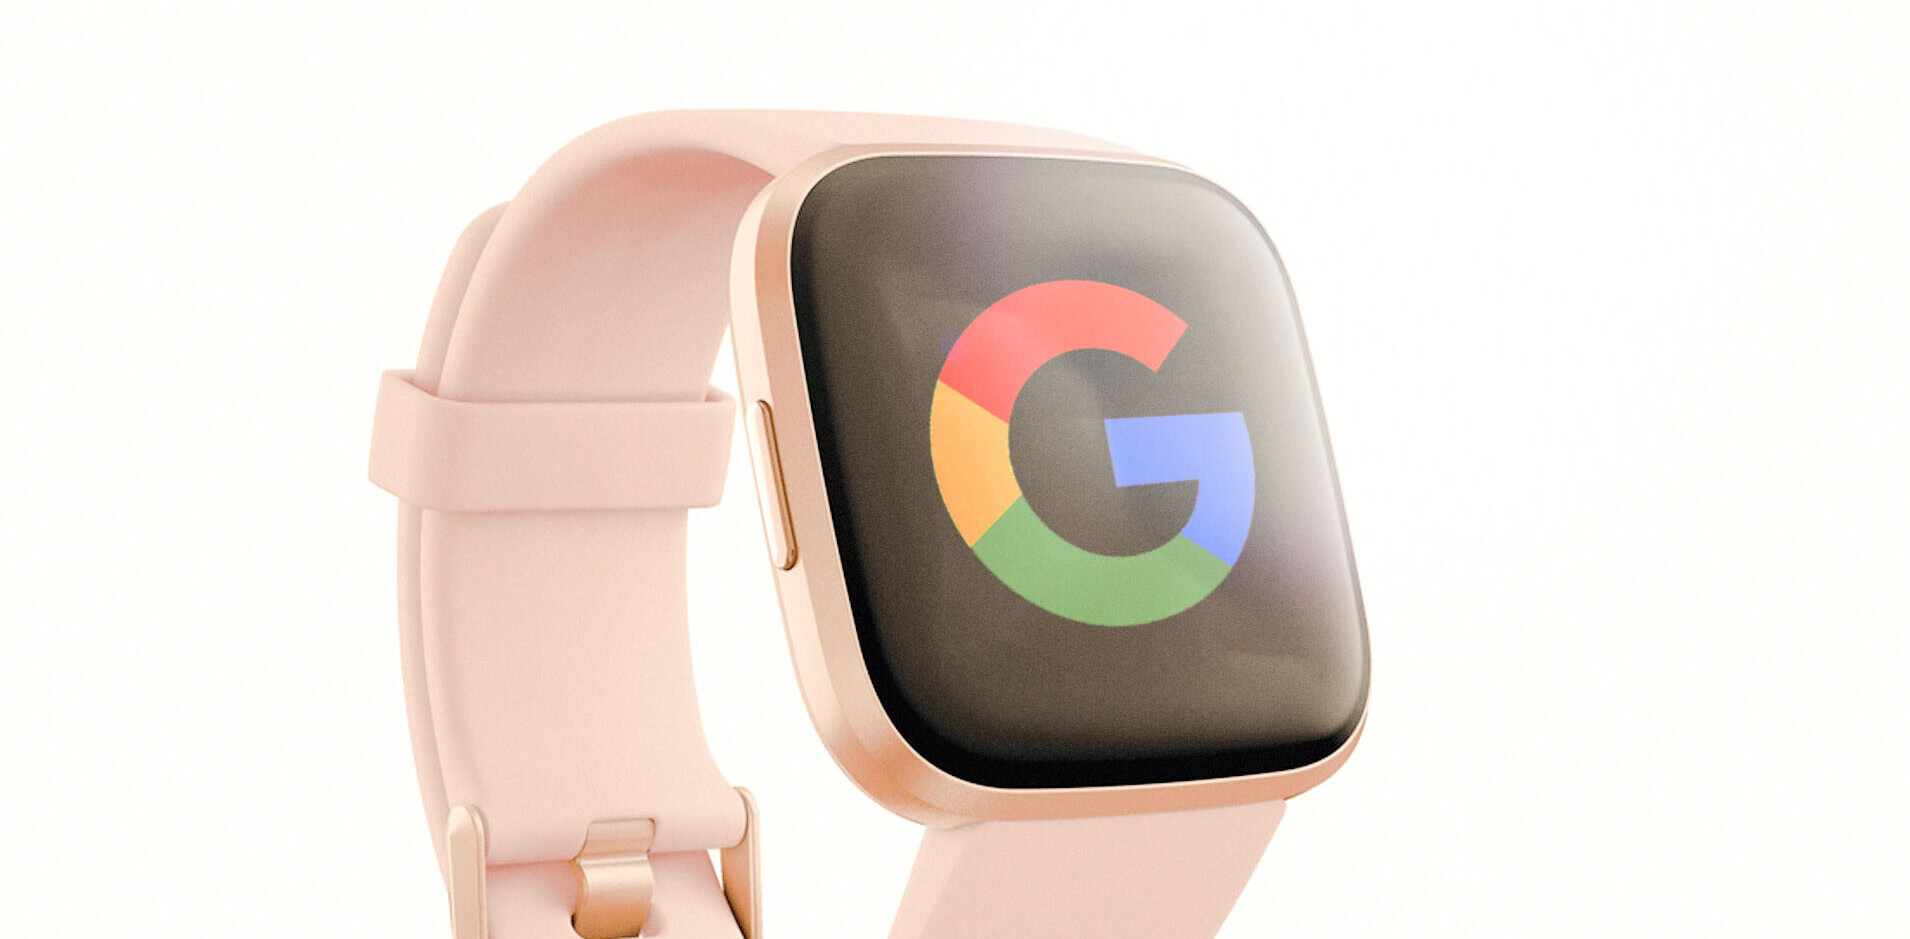 It’s official: Google is buying Fitbit for $2.1 billion